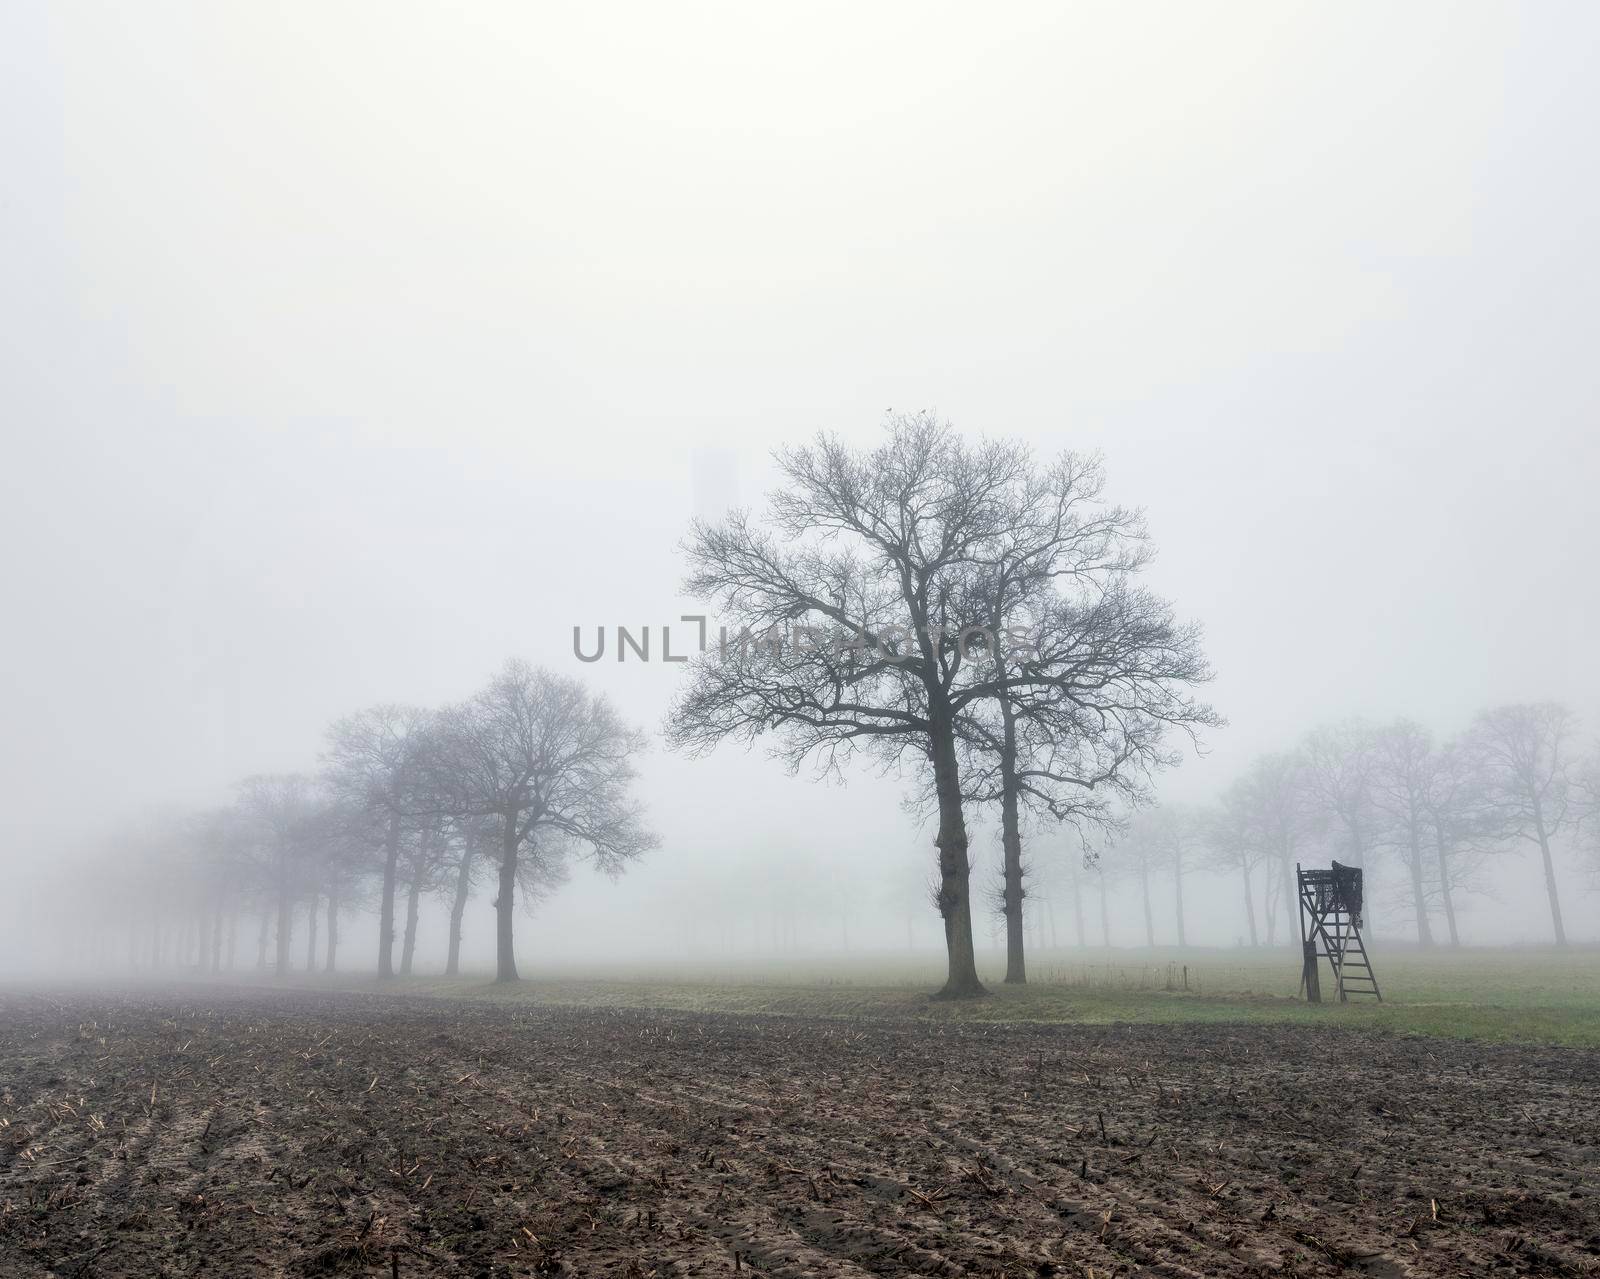 silhouettes of oak trees and high seat for hunting in green grass of winter field near utrecht in the netherlands on misty winter day